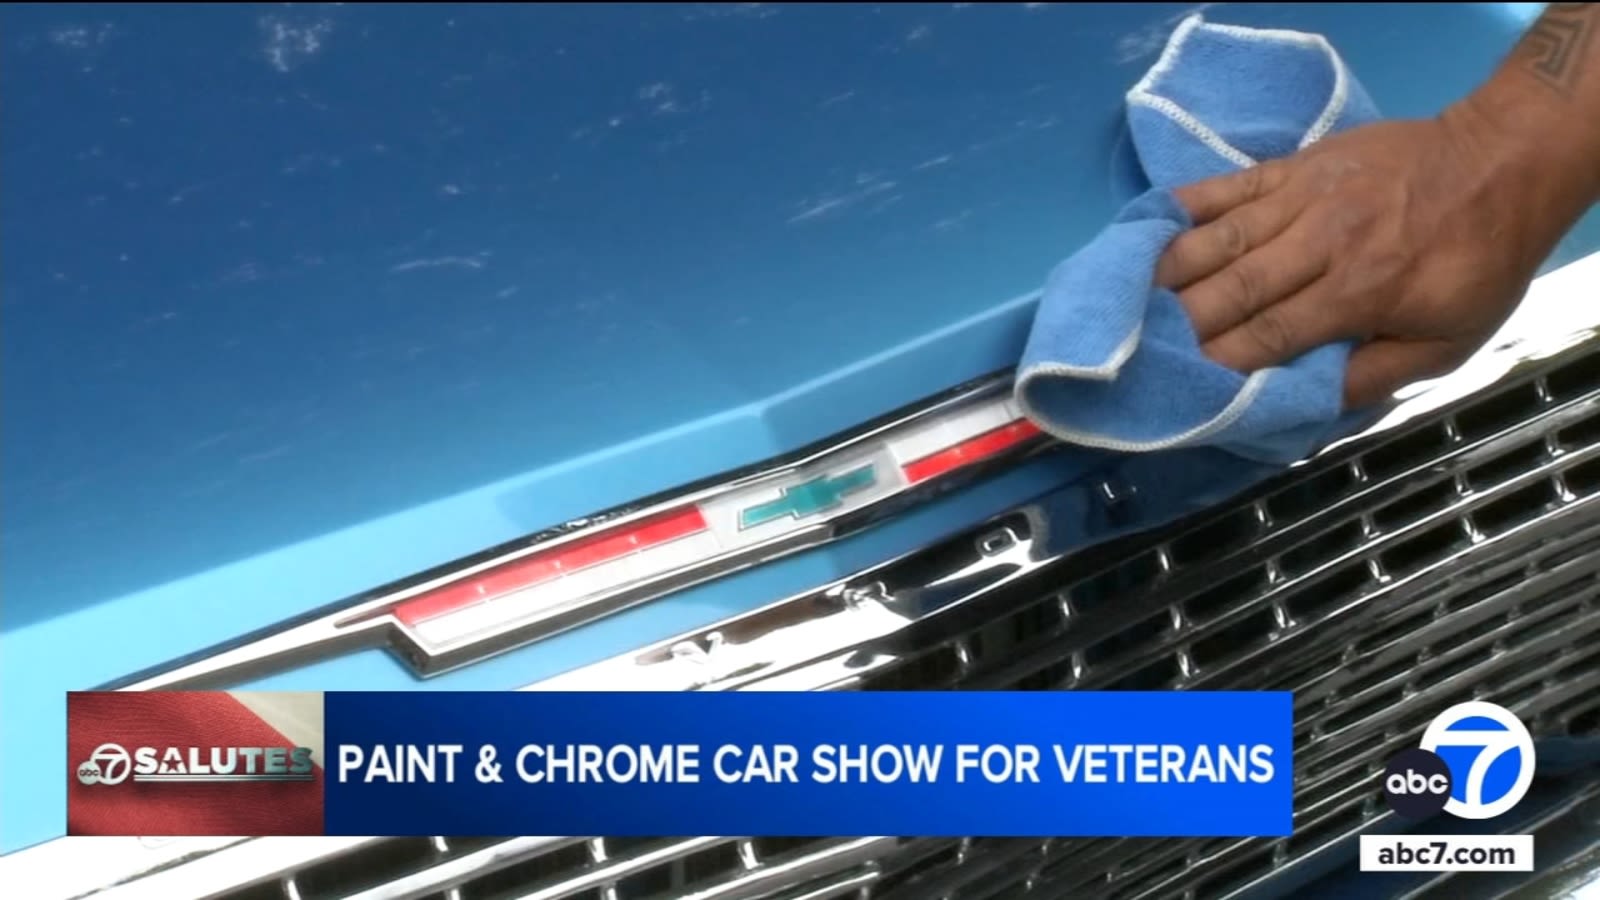 Hot cars, shiny chrome, draw crowds to fundraiser for 'Operation Restoring Veteran Hope'